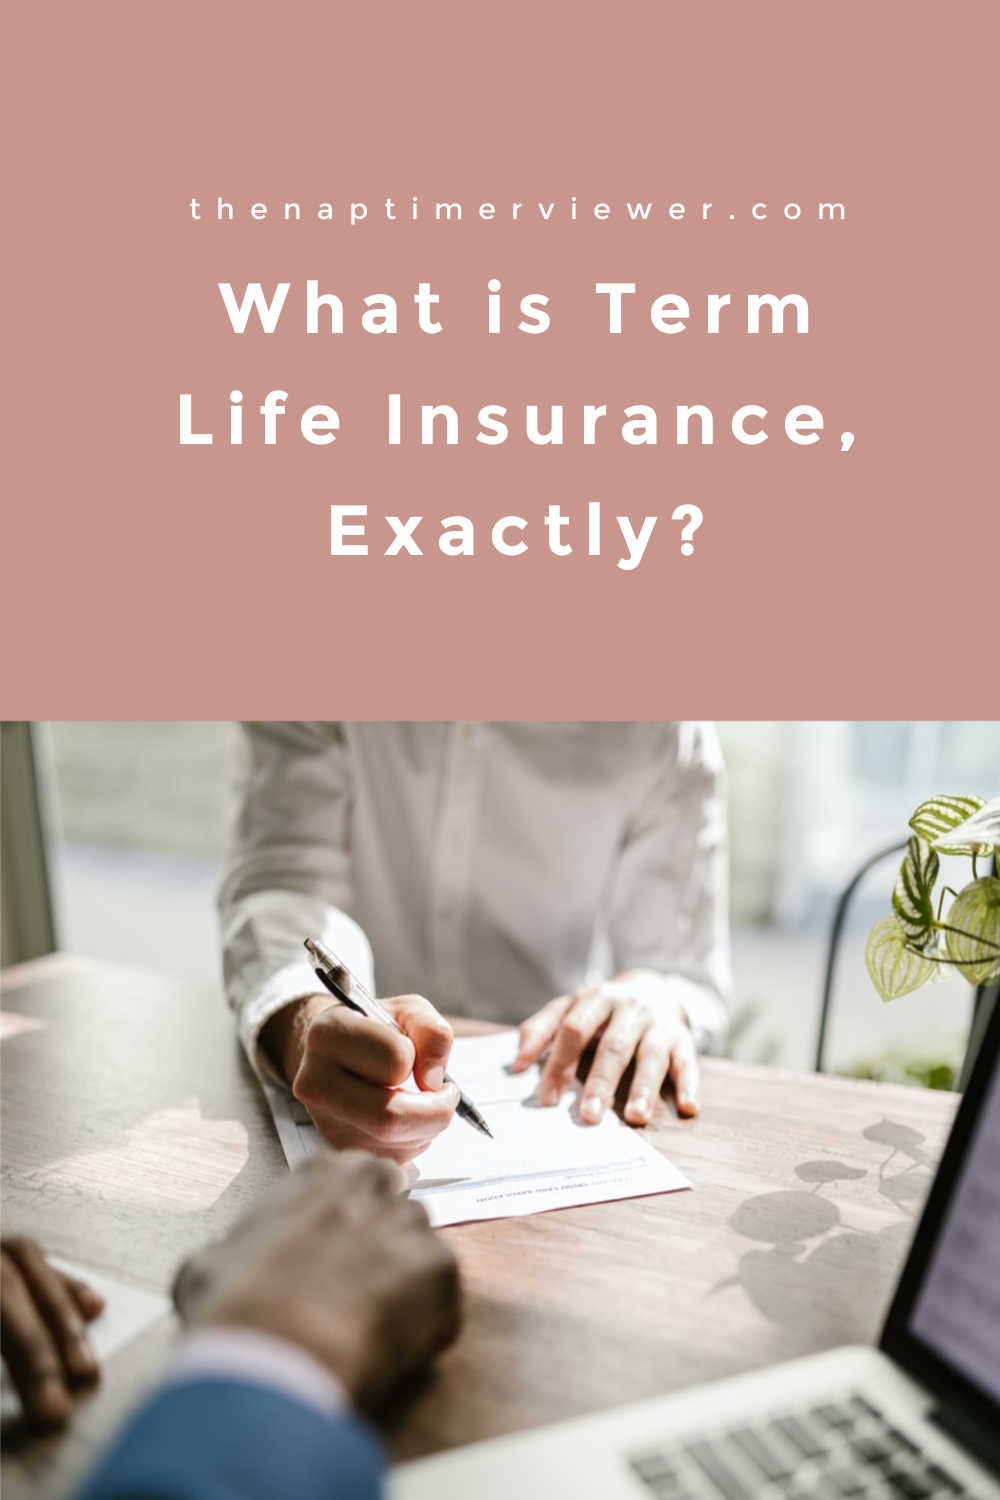 What is Term Life Insurance, Exactly?